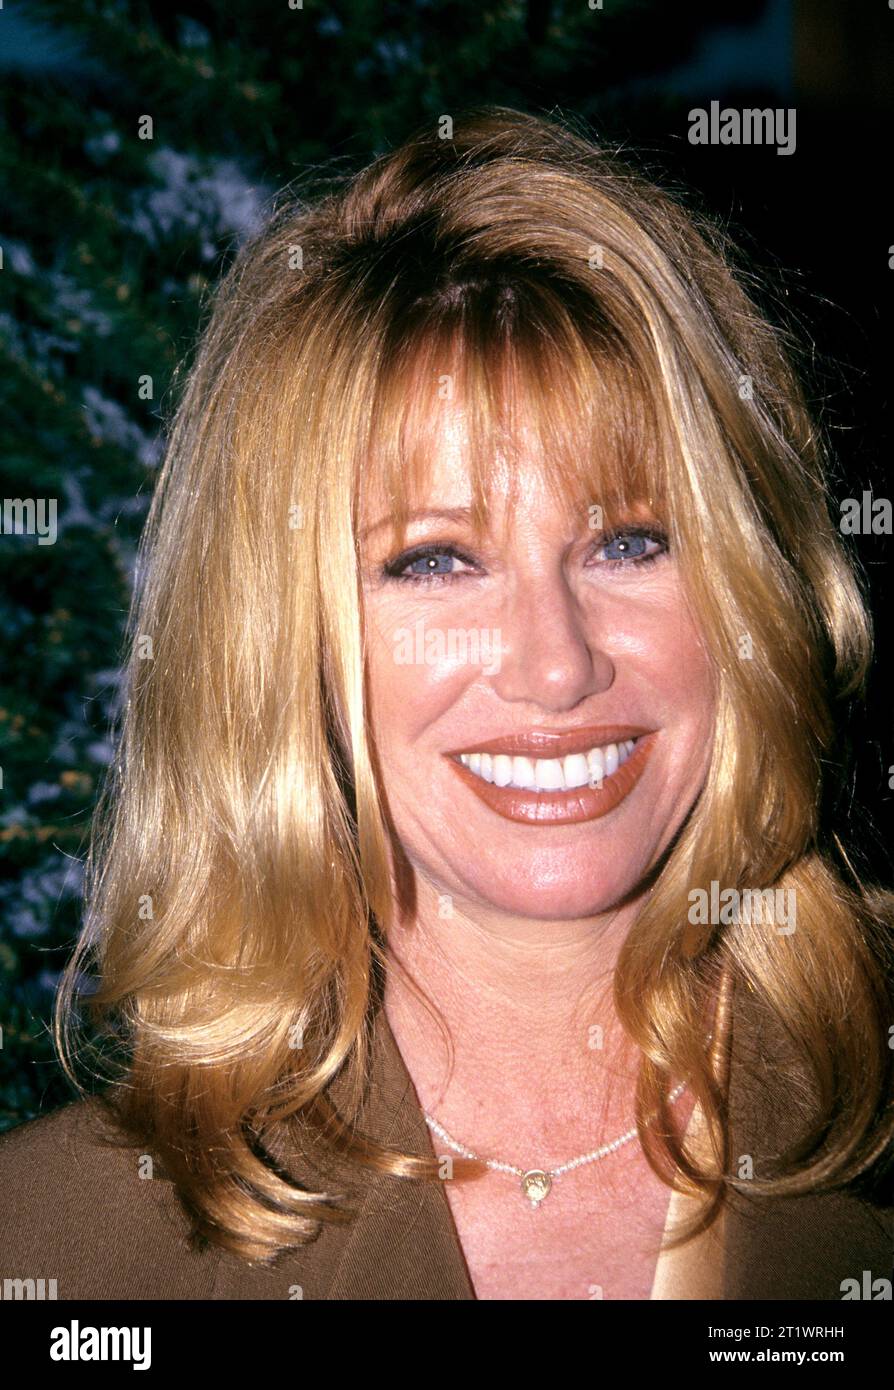 Suzanne Somers pictured at the NATPE Convention at the Miami Convention Center in Miami, Florida on January 27, 1994. Copyright: xJosephxMarzullox/xMediaPunchx Credit: Imago/Alamy Live News Stock Photo